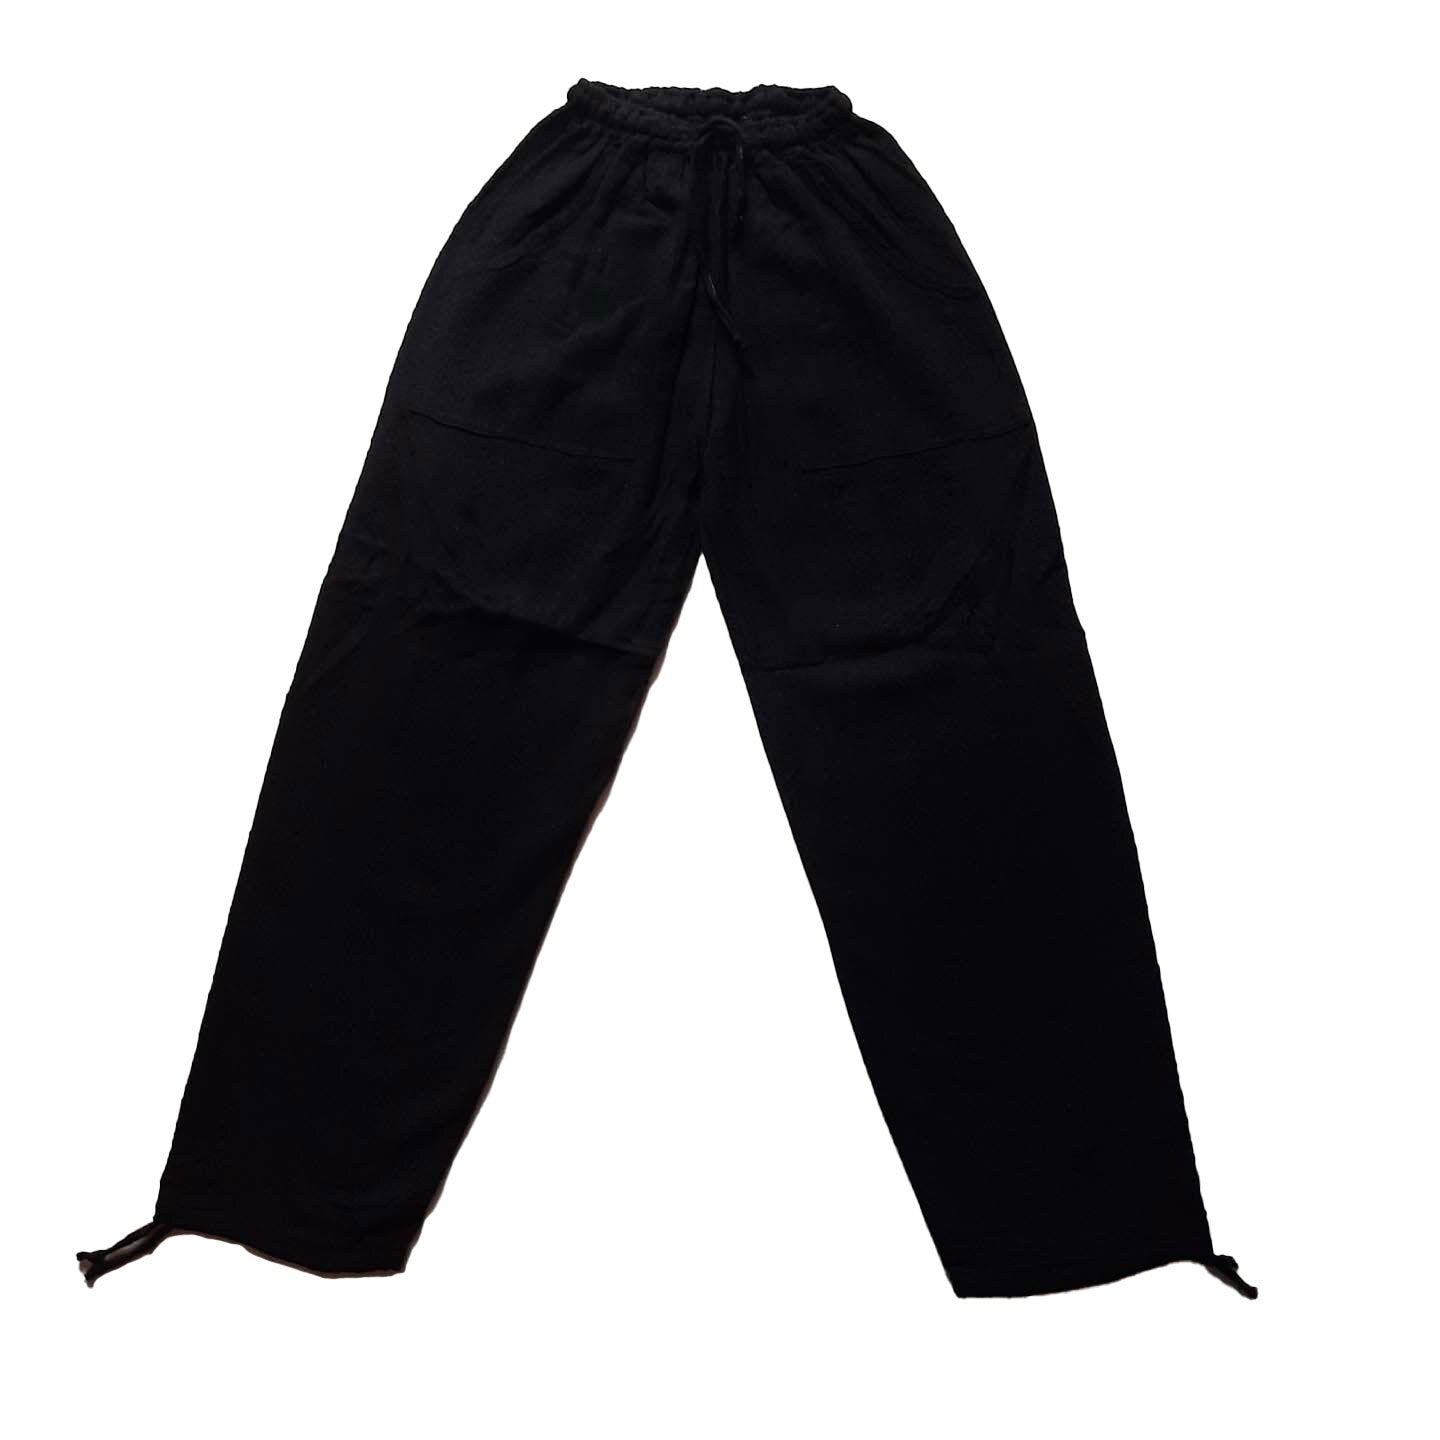 Pants Size M | Hippie Pants | Loungewear Womens Pants | Comfy Clothes | Mens Pants with Pockets | Black | Father's Day Gift